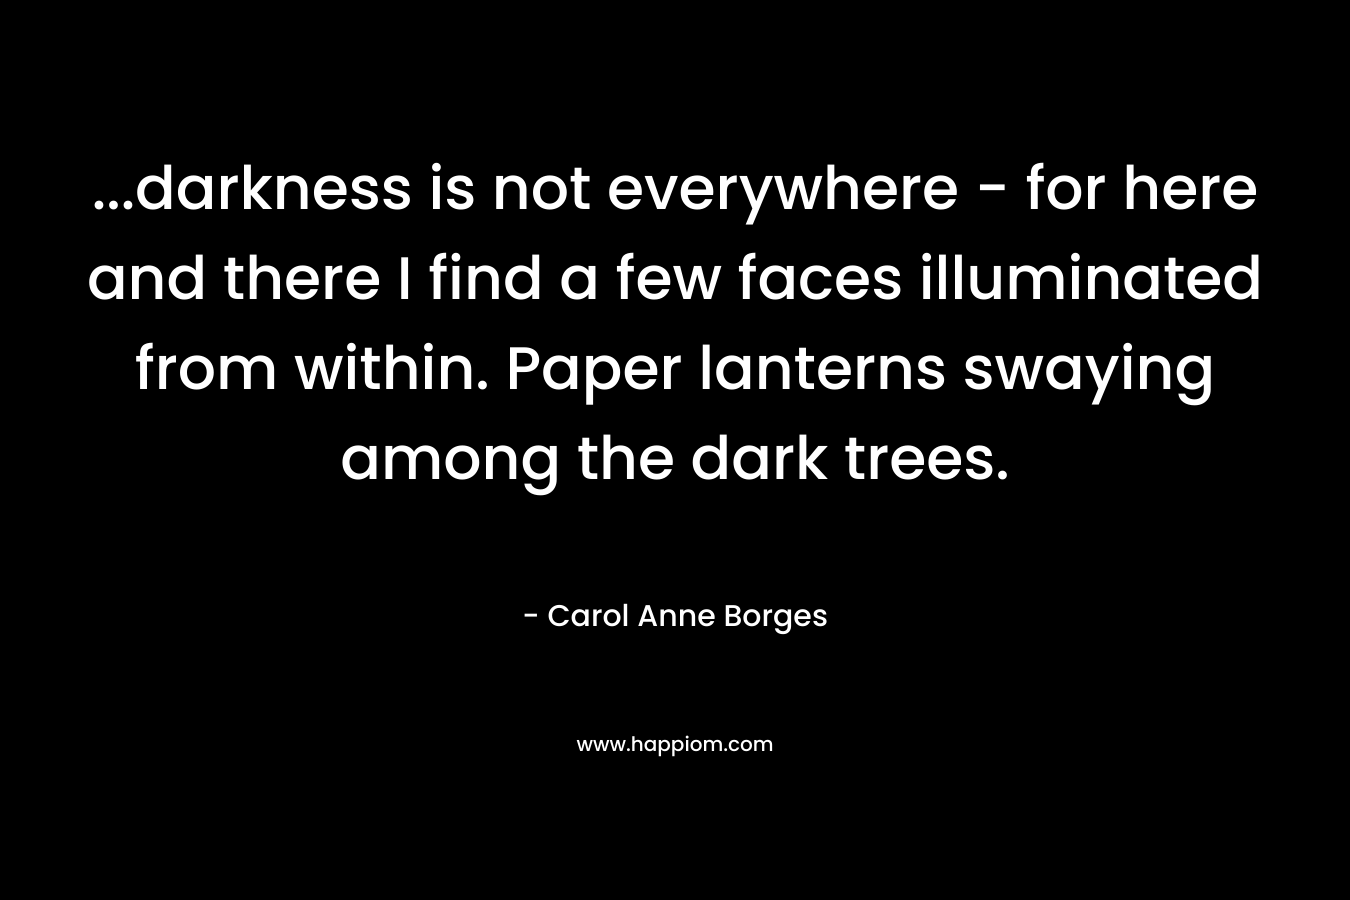 ...darkness is not everywhere - for here and there I find a few faces illuminated from within. Paper lanterns swaying among the dark trees.